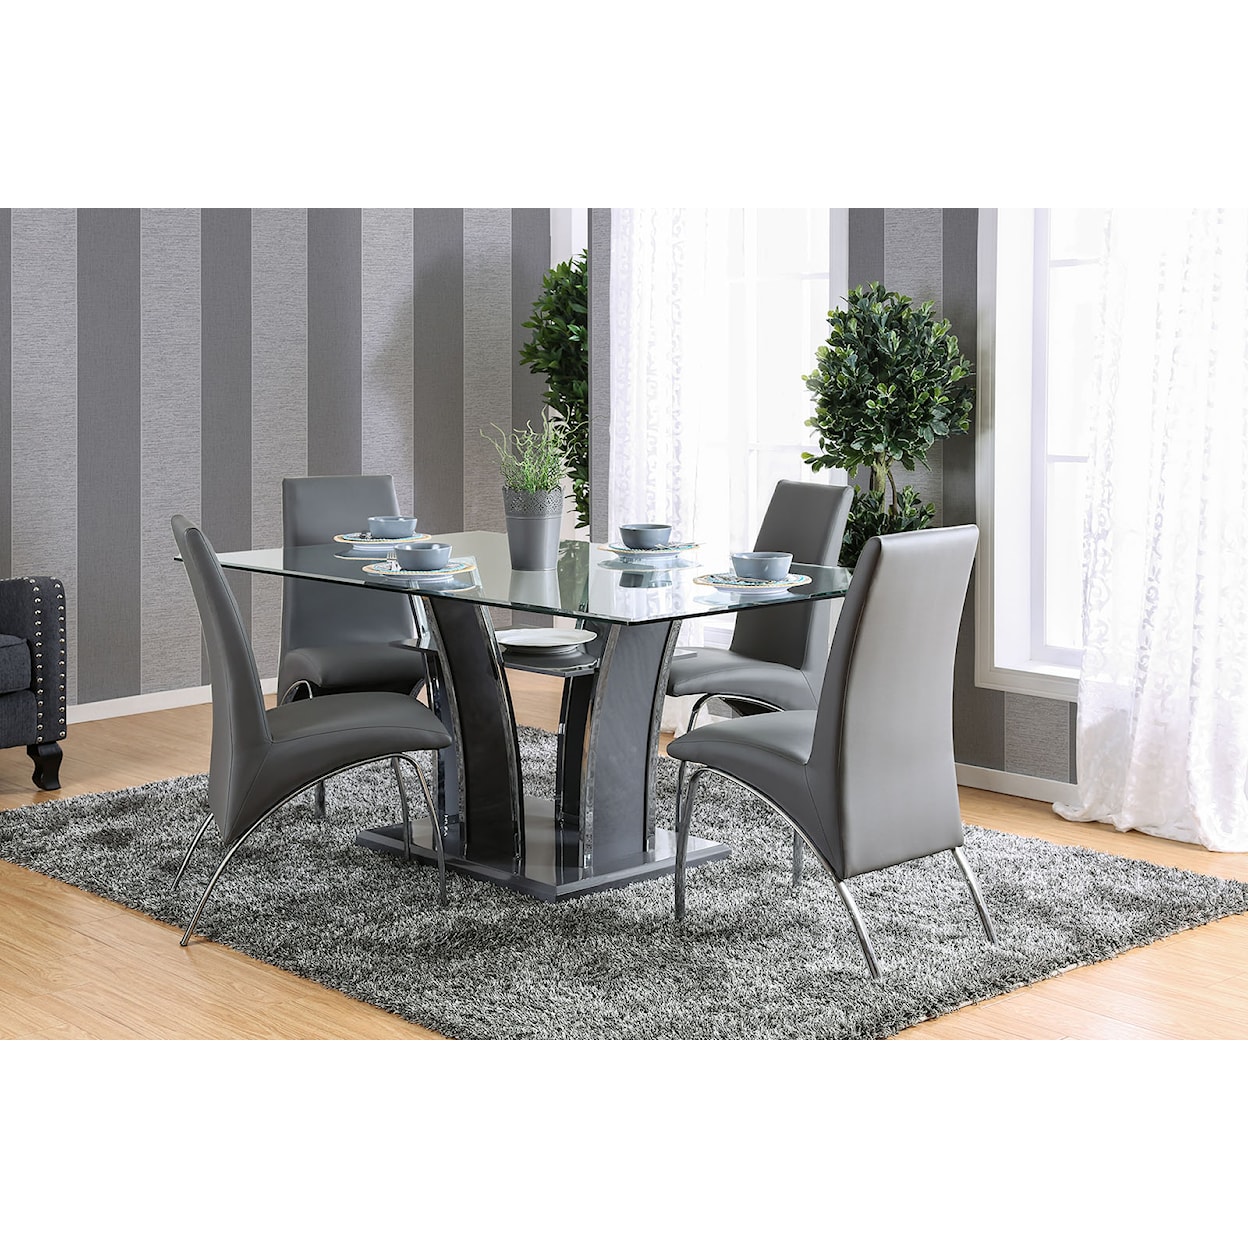 FUSA Glenview Dining Table 